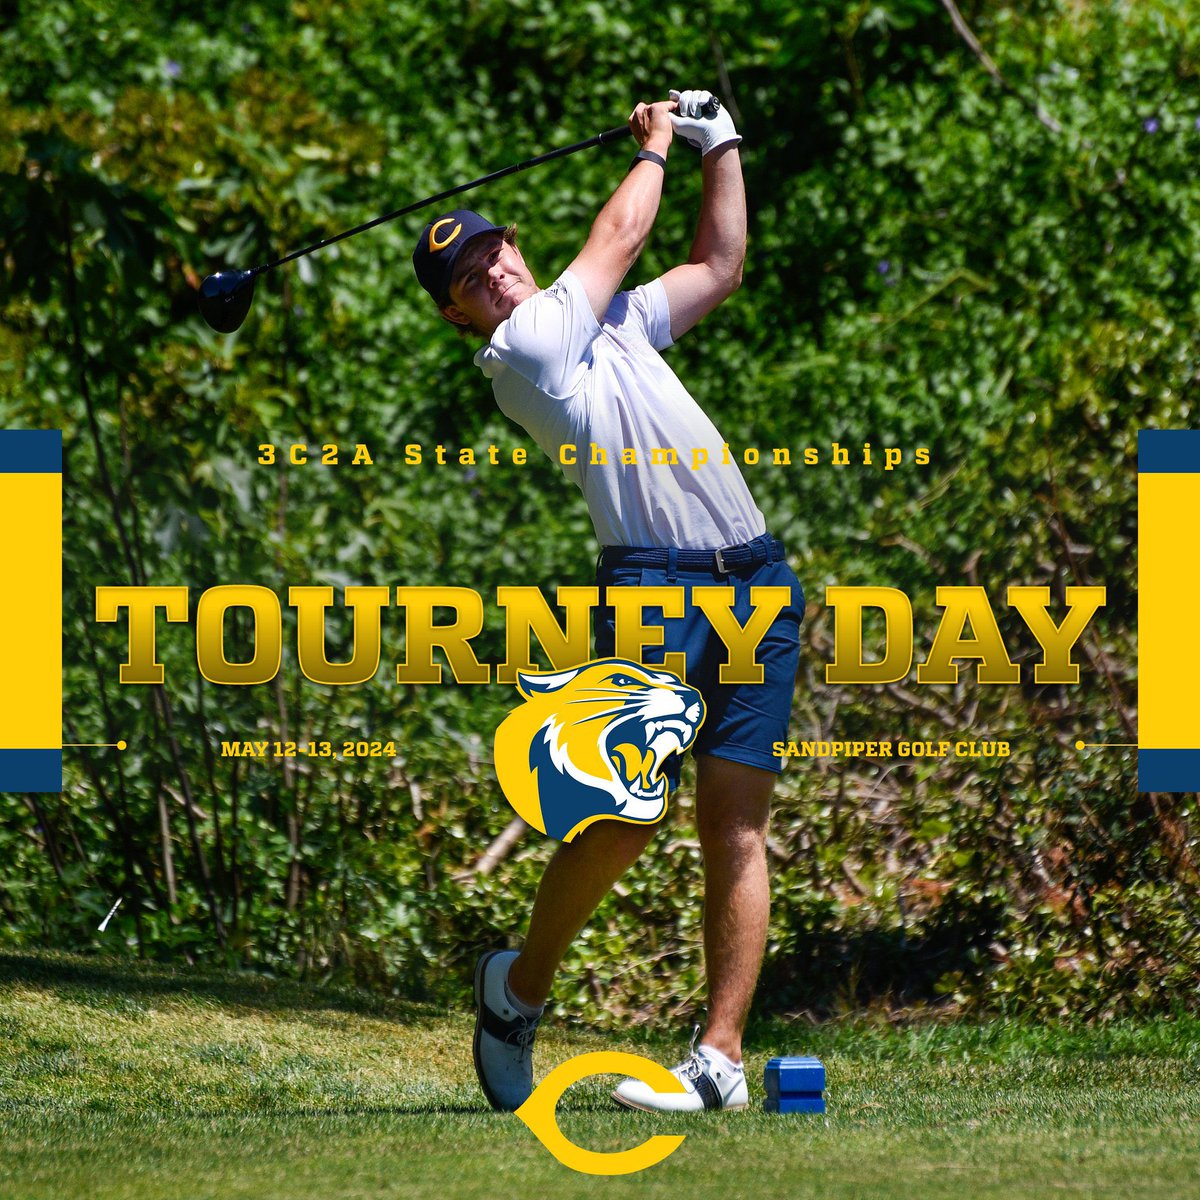 It’s a great day to play for a state championship!!! #GoCougs #COCmensgolf #COCathletics #3C2A